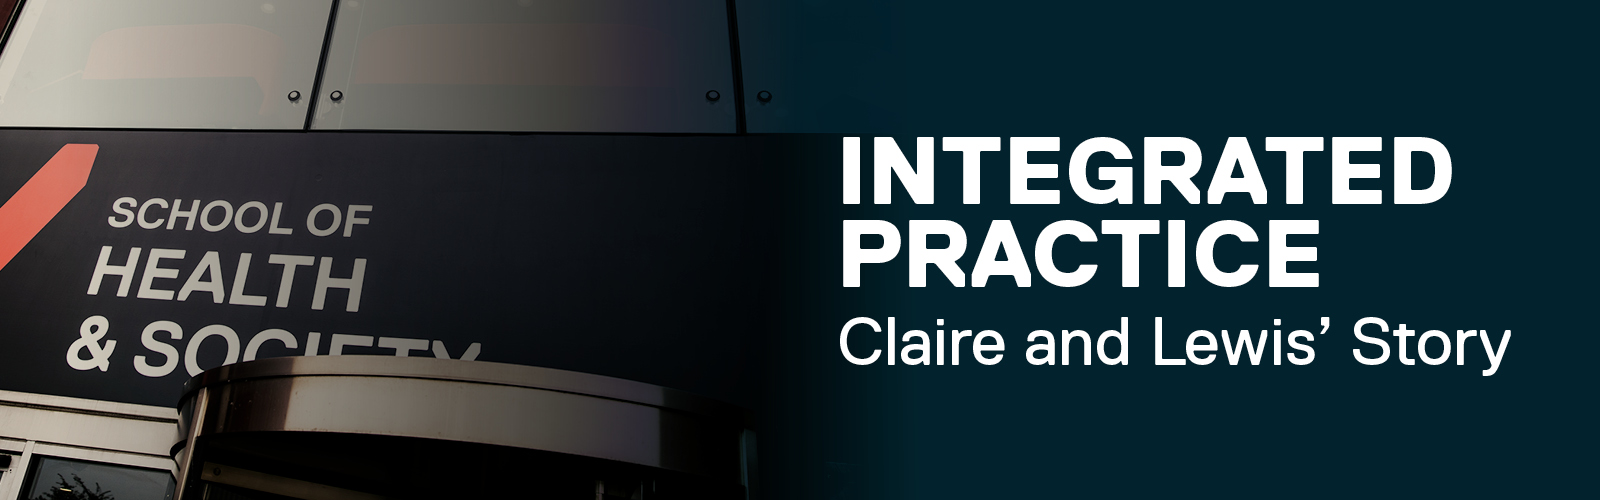 Integrated Practice Blog Image - Claire and Lewis - their story